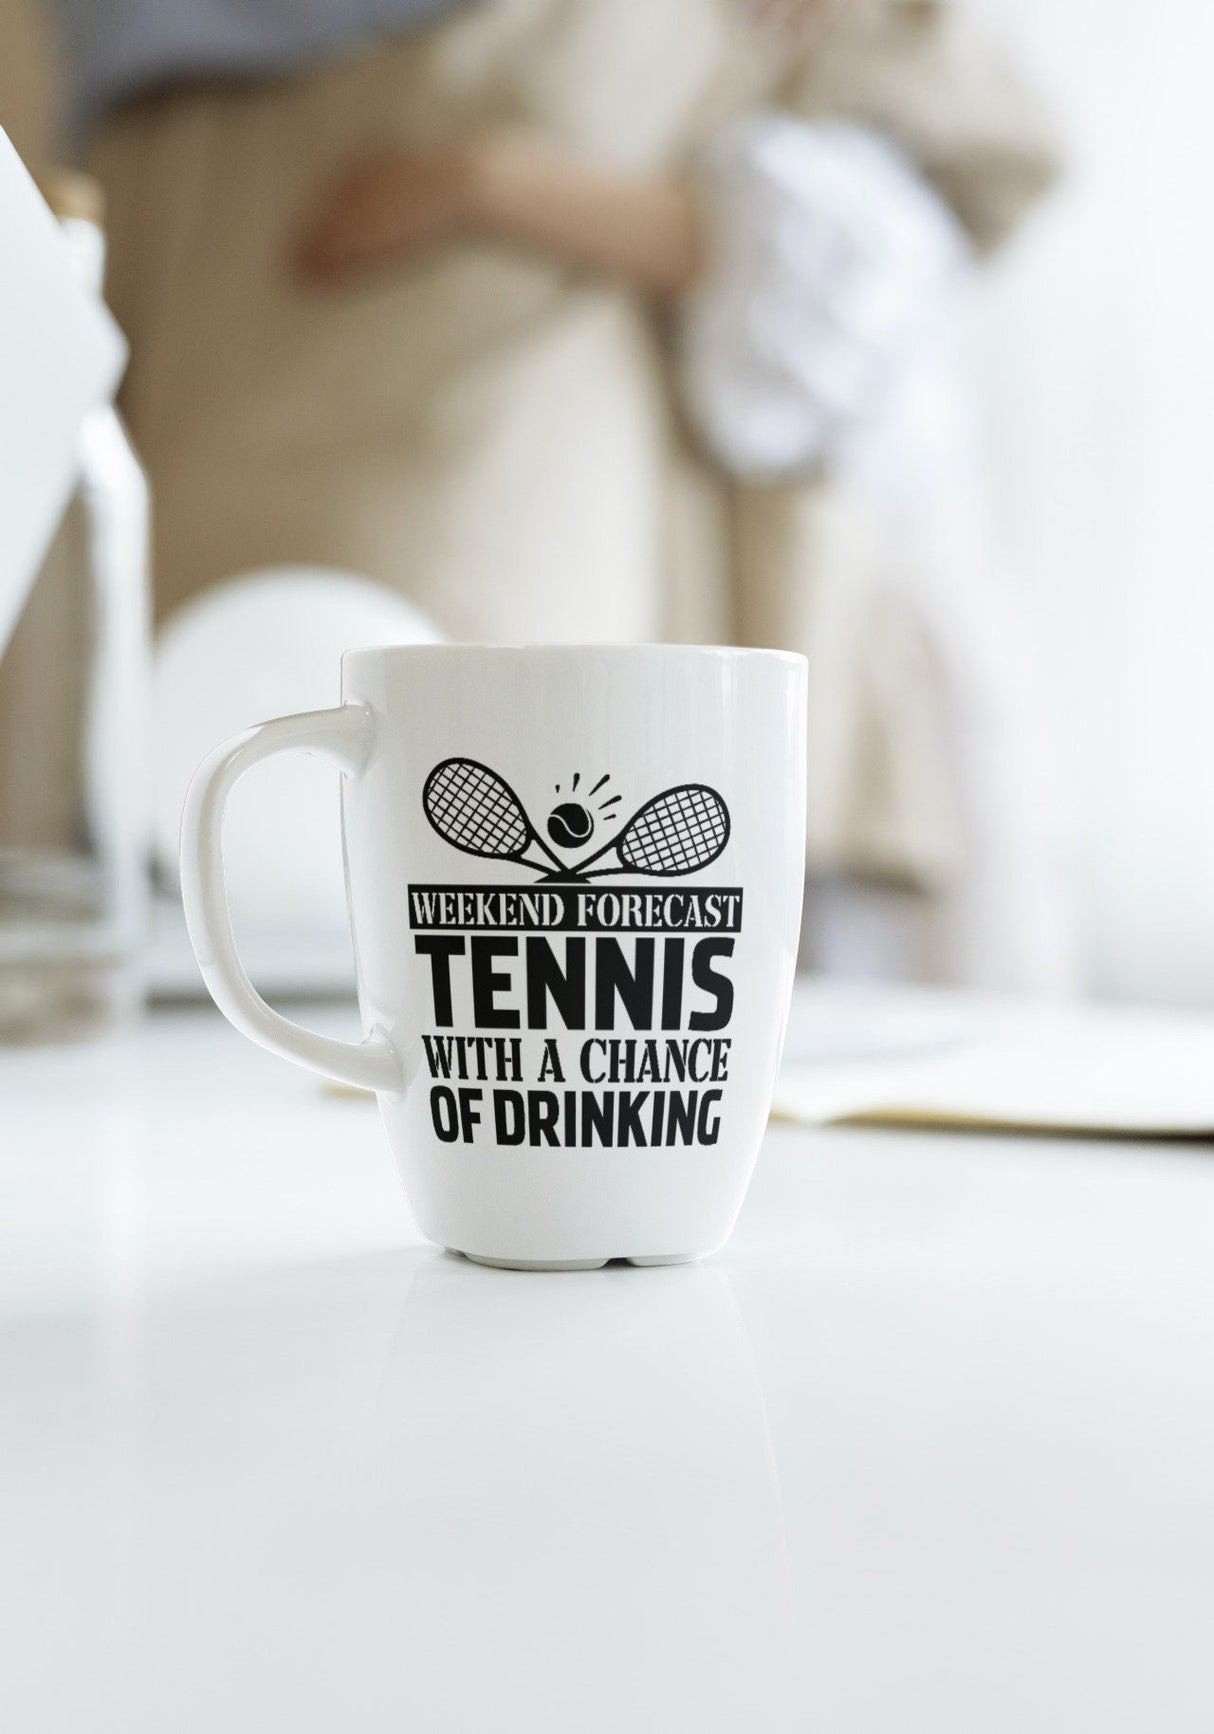 Weekend Forecast Tennis With A Chance of Drinking SVG Cut File